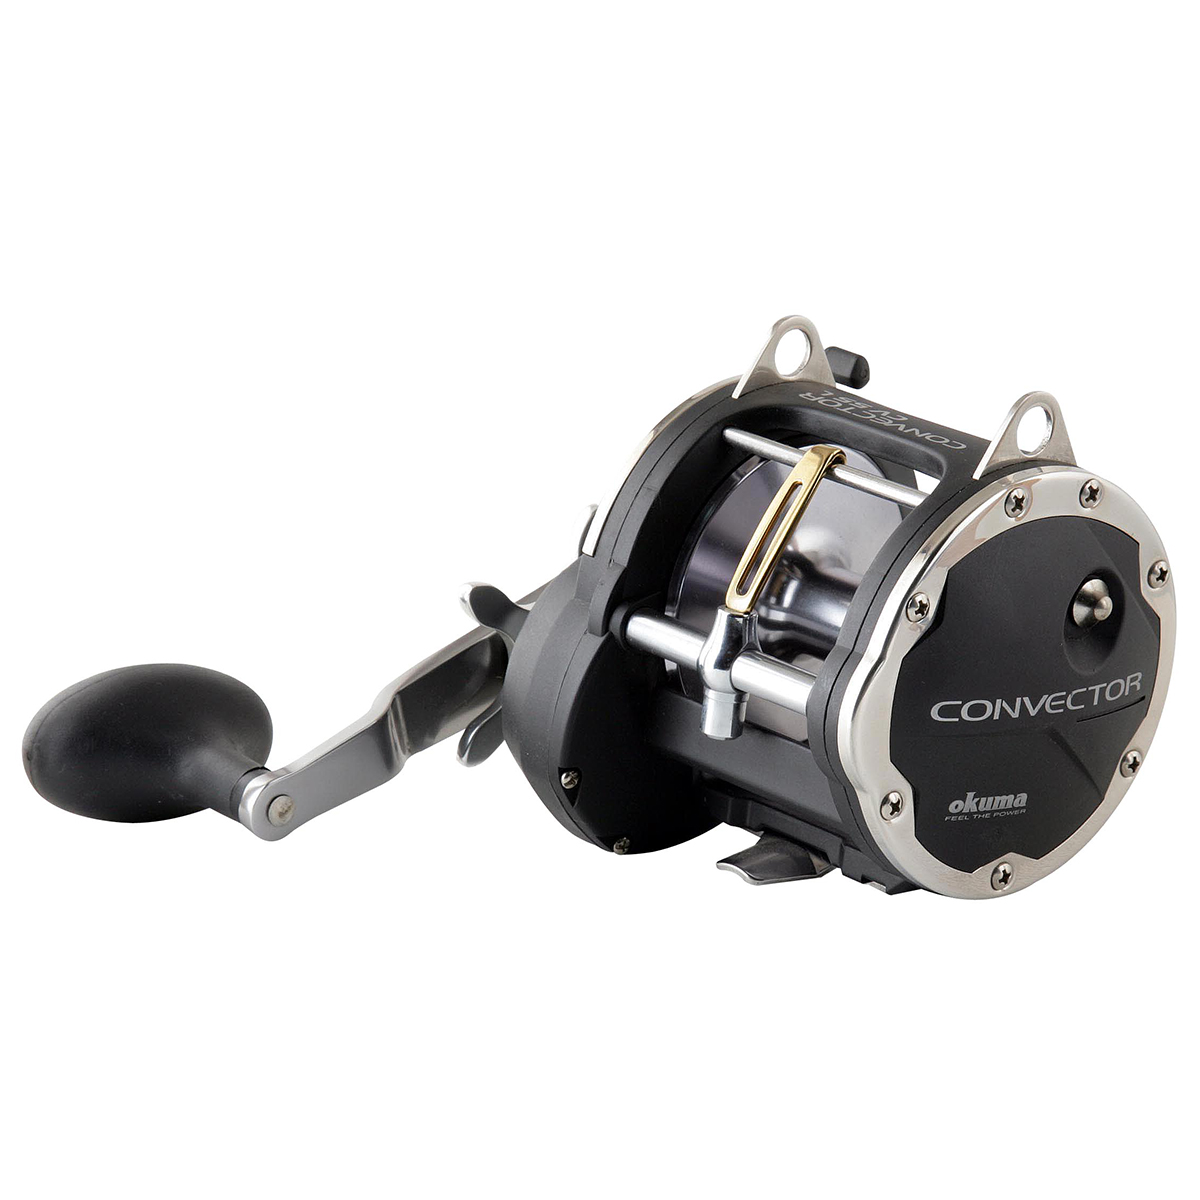 Okuma Convector CV 45D Reel Pre-Spooled With Lead Core, Backing And Leader  CHOOSE NUMBER OF COLORS!